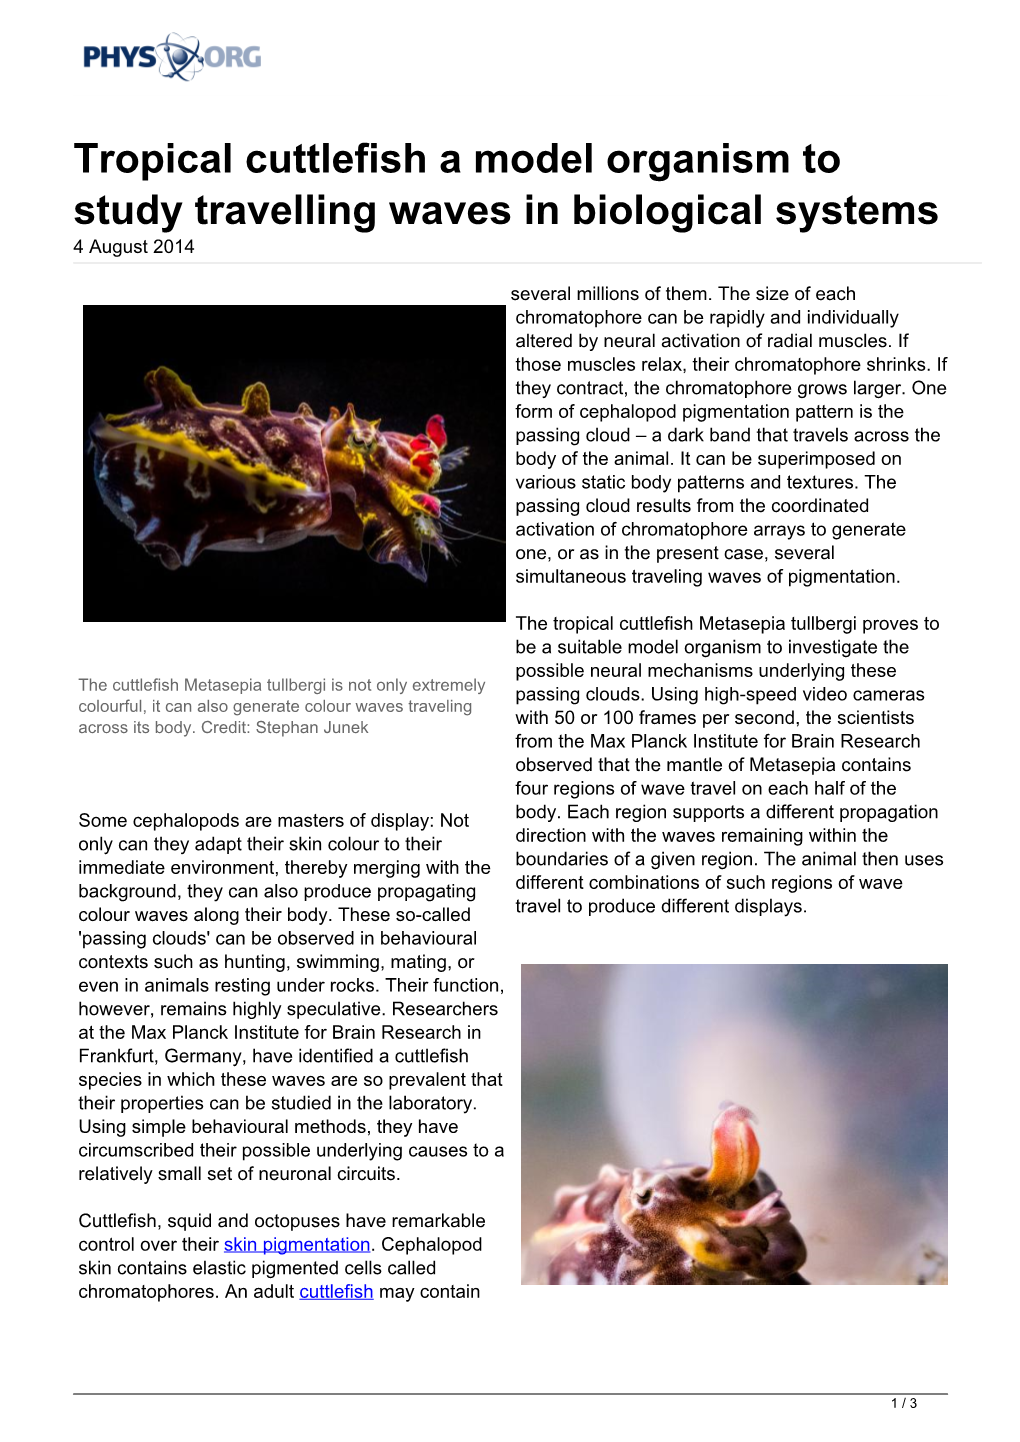 Tropical Cuttlefish a Model Organism to Study Travelling Waves in Biological Systems 4 August 2014